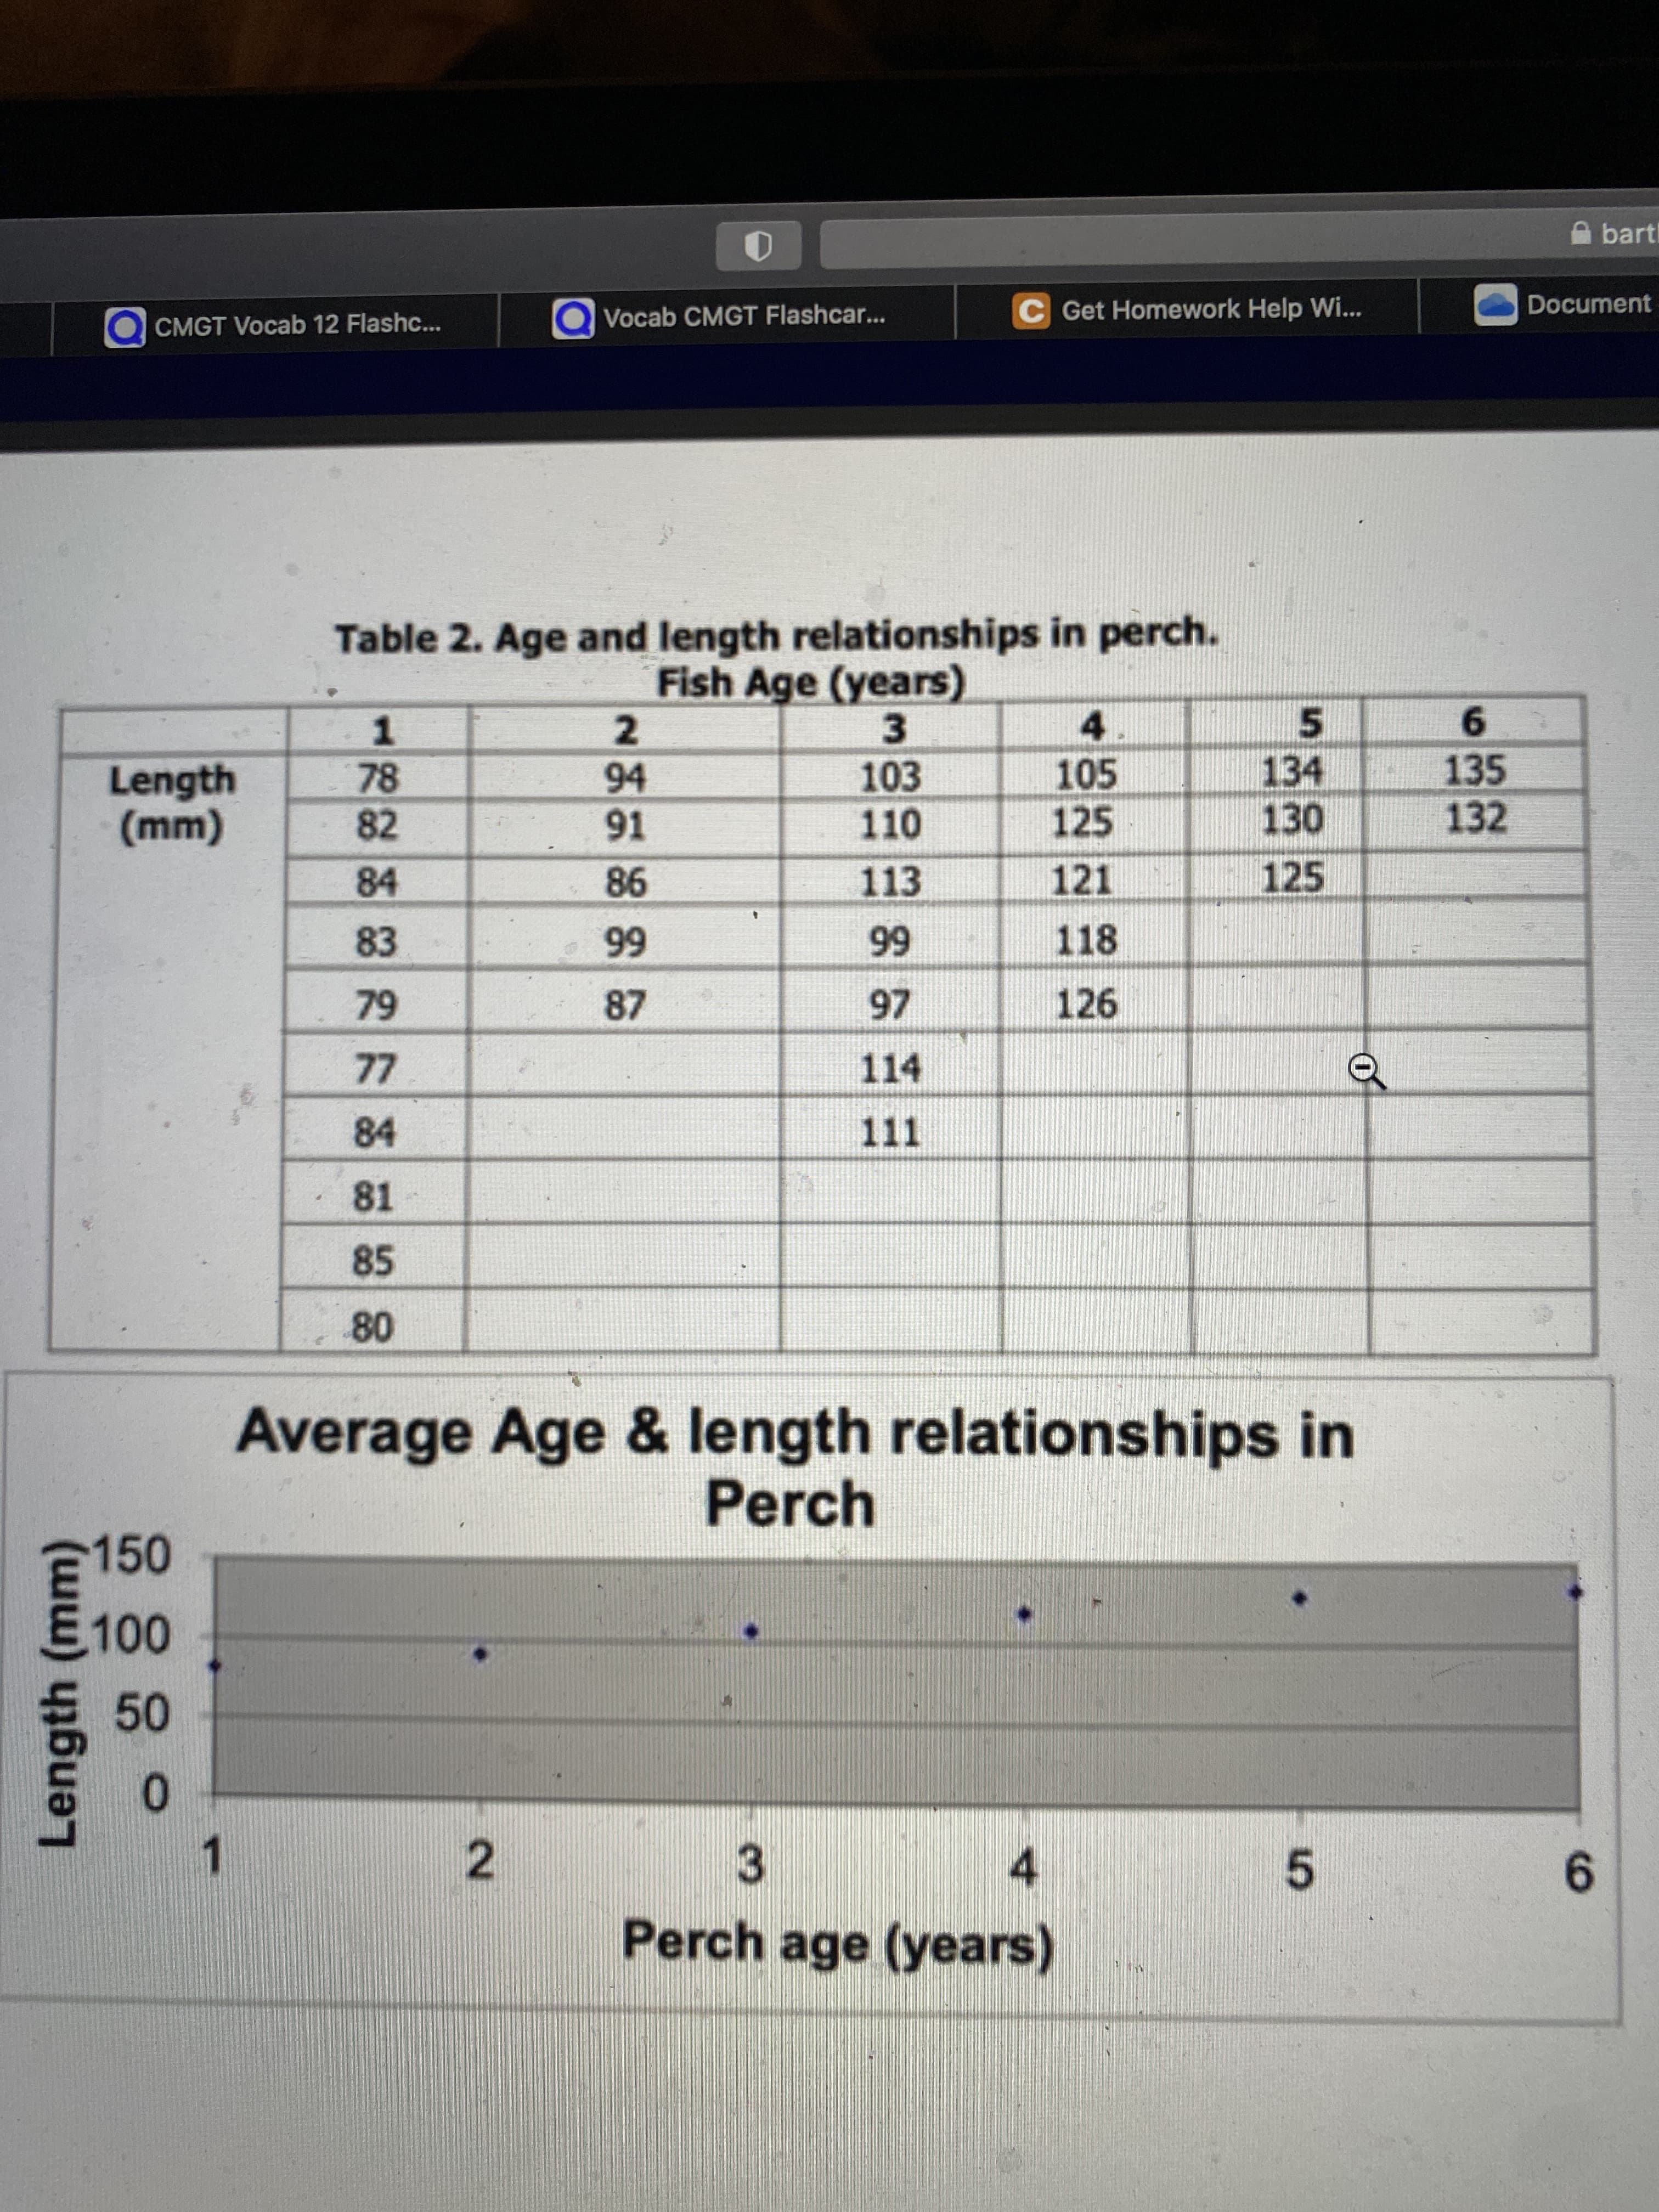 3.
2.
Length (mm)
A bart!
C Get Homework Help Wi...
Document
CMGT Vocab 12 Flashc...
Vocab CMGT Flashcar...
Table 2. Age and length relationships in perch.
Fish Age (years)
1.
78
(3.
103
4.
105
5.
134
6.
135
2.
Length
82
91
110
125
130
132
(wm)
84
113
121
125
98
83
118
66
66
126
114
LL
84
of
111
81
85
08
Average Age & length relationships in
Perch
150
E 100
0
4.
Perch age (years)
5.
6.
